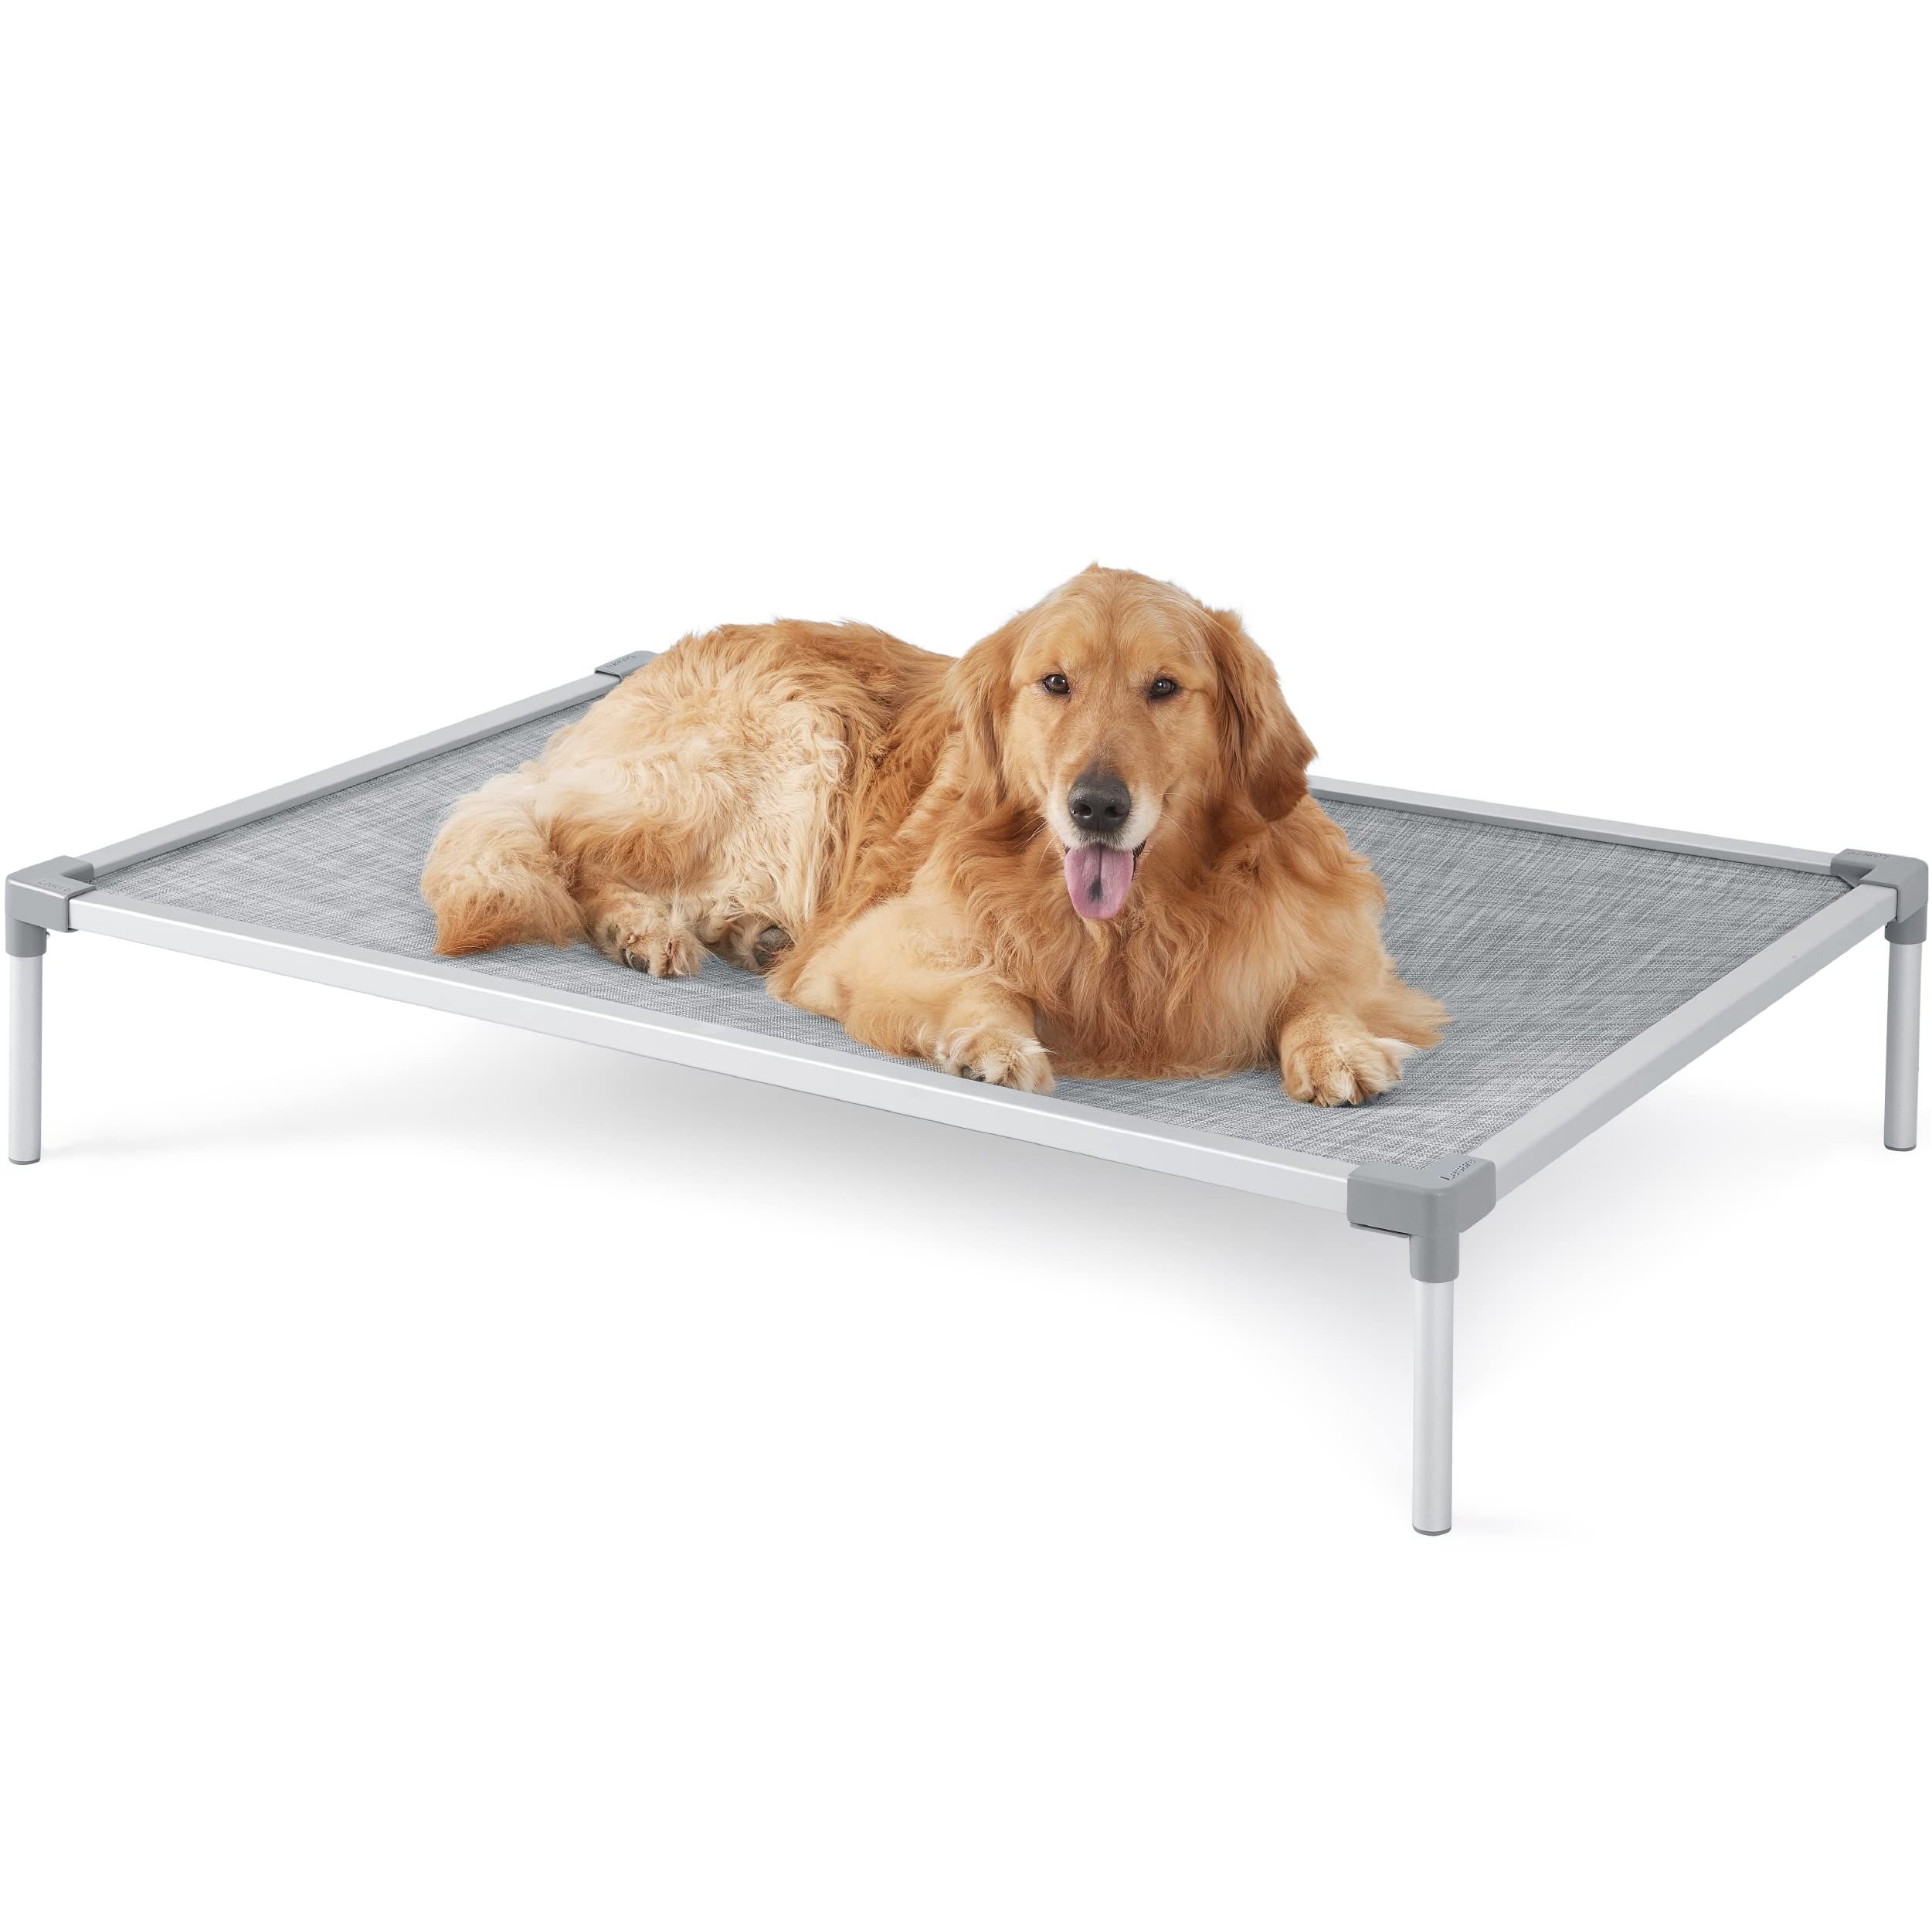 what is the best type of bed for a dog